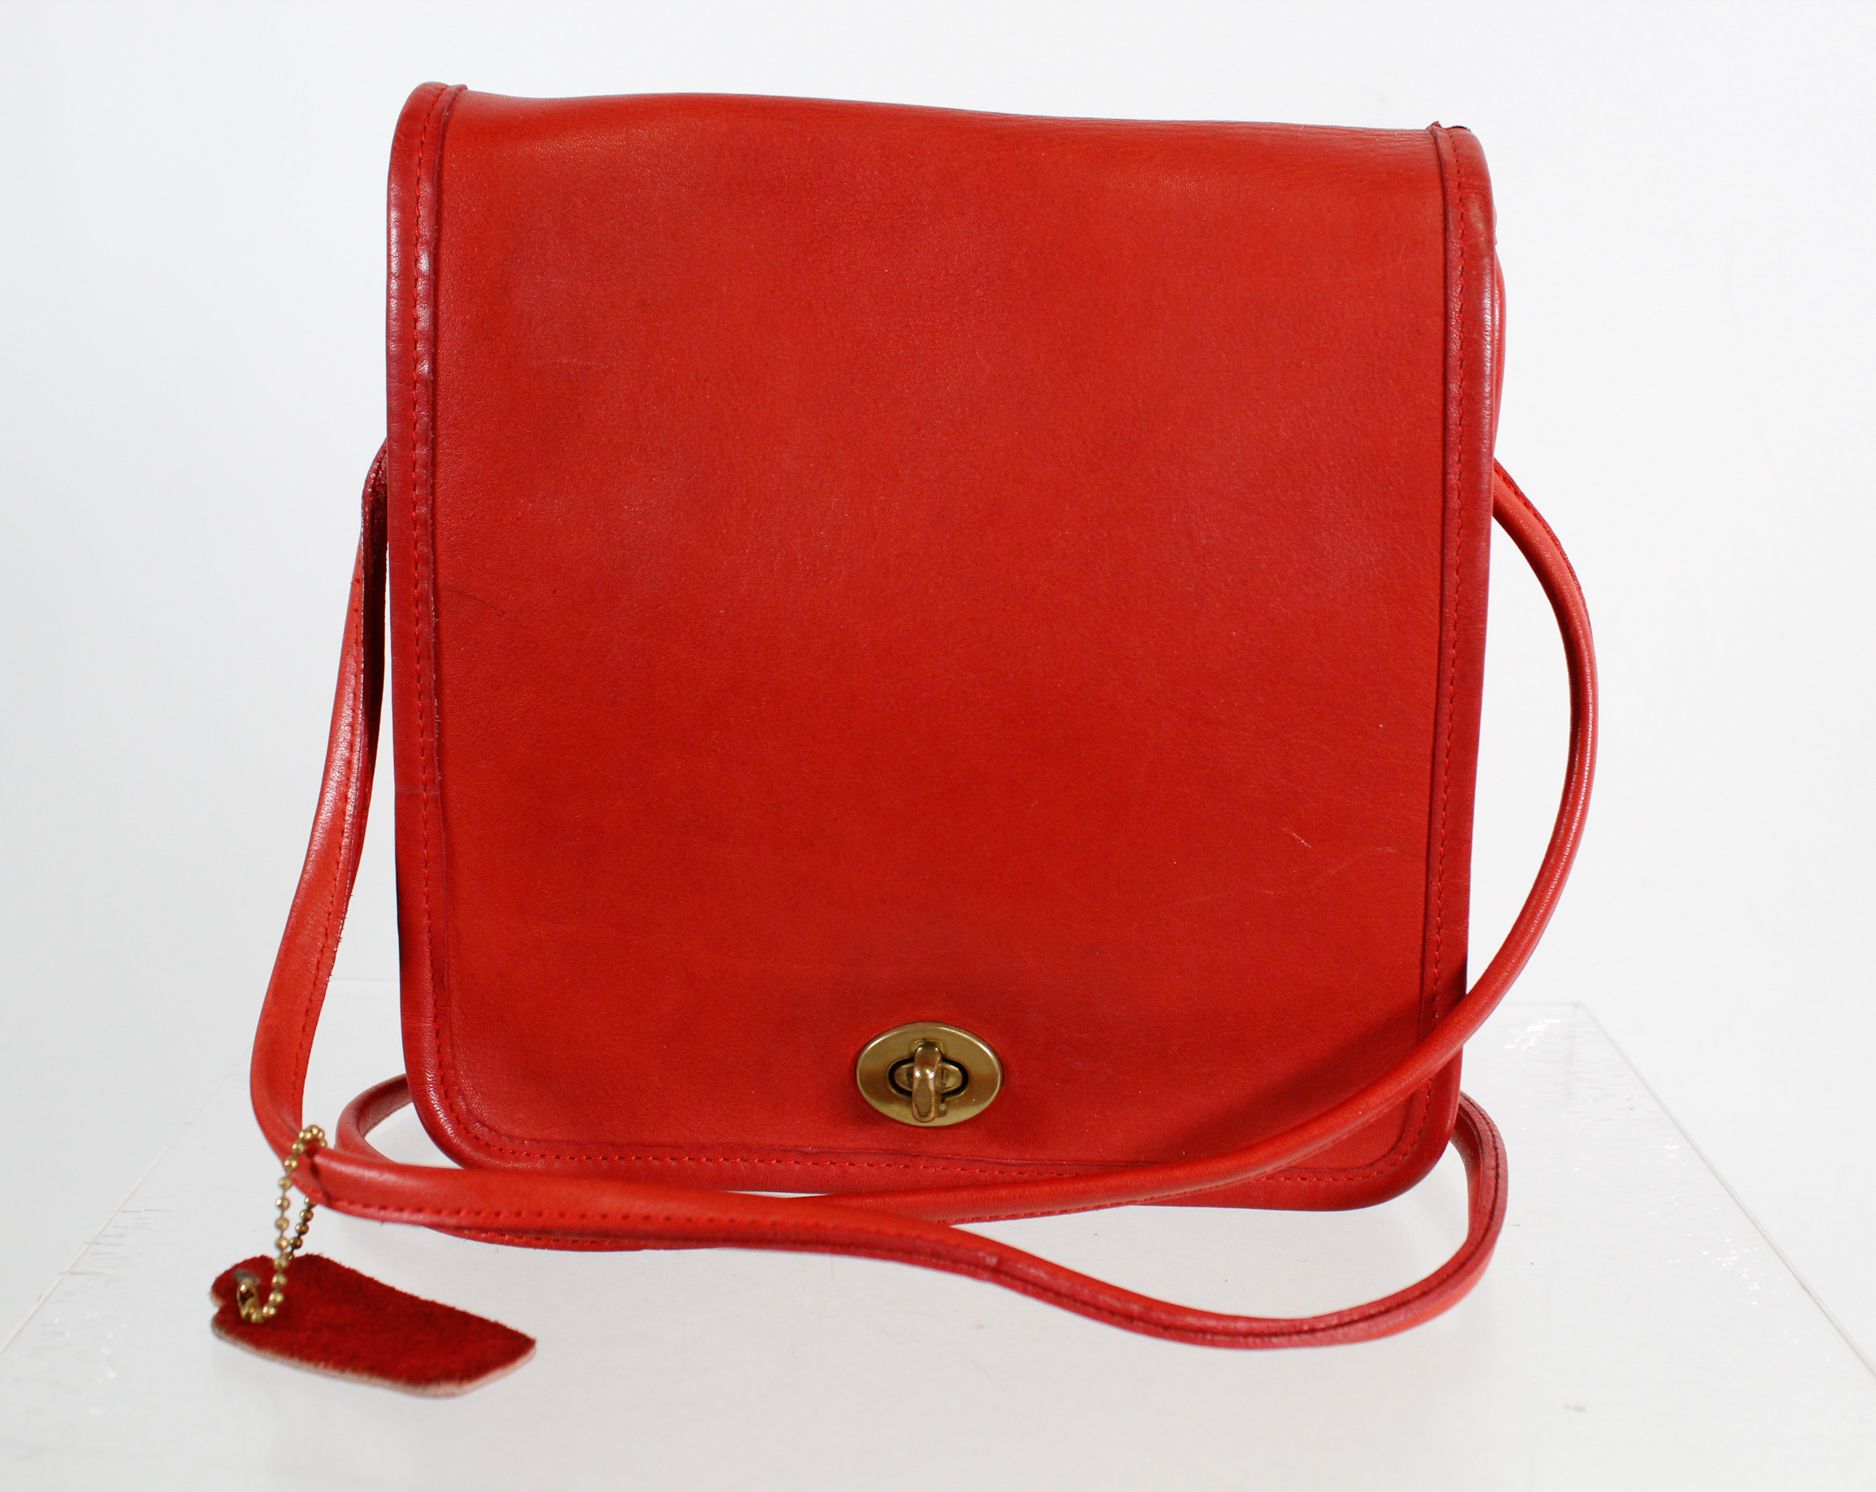 Vintage Coach 8809 Red Leather Turnlock Small Flap Cross-Body Purse | eBay